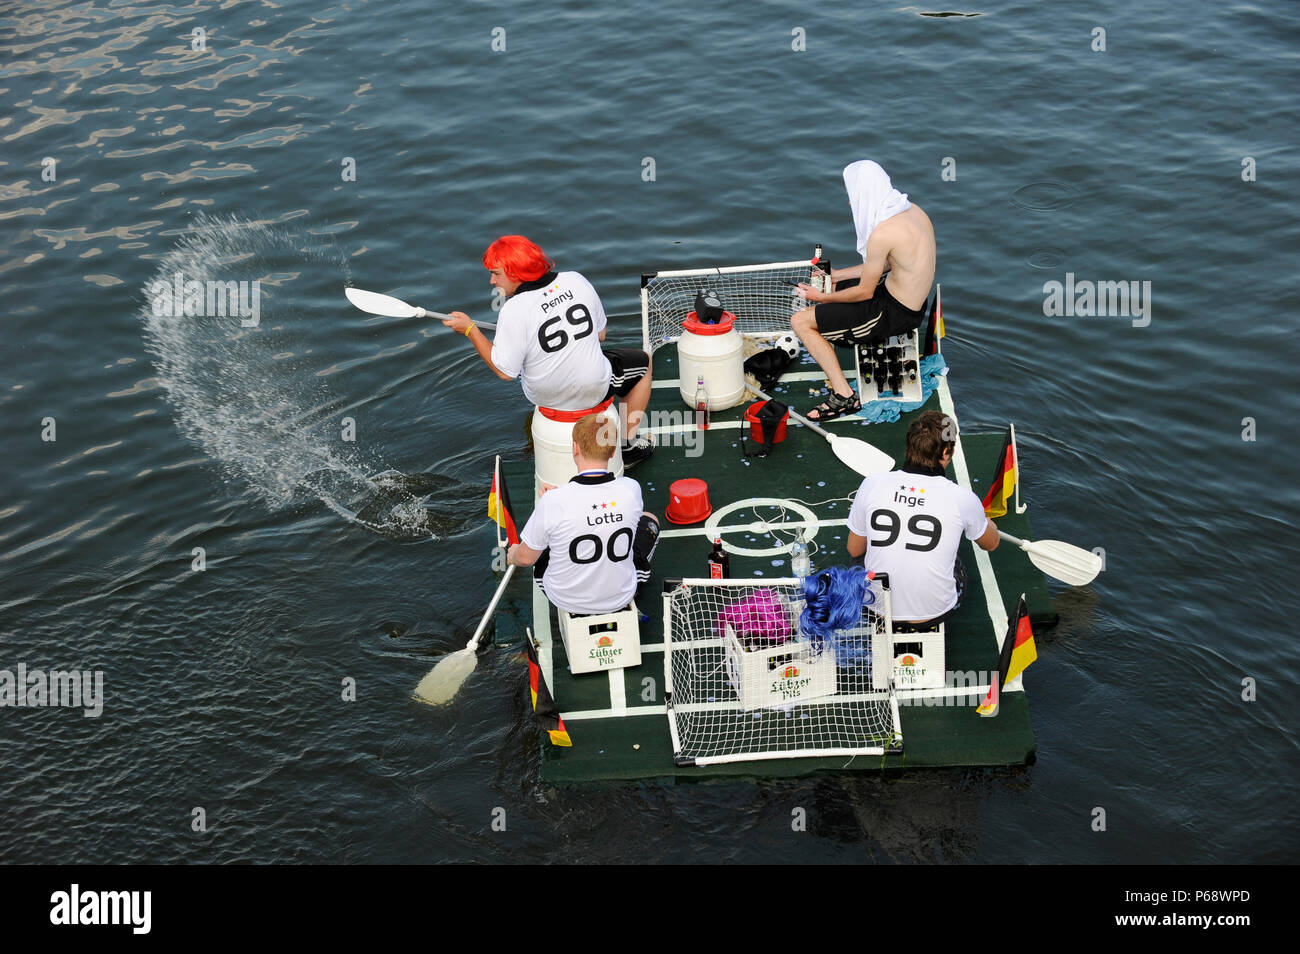 GERMANY, East Germany, Plau, floating mini football field with goal and german flags, four paddling fans in football jersey of German women soccer team and beer box, at funny boat contest and carnival like event Badewannenrallye engl. bathtub rallye, drinking Luebzer beer a brand of Carlsberg Stock Photo